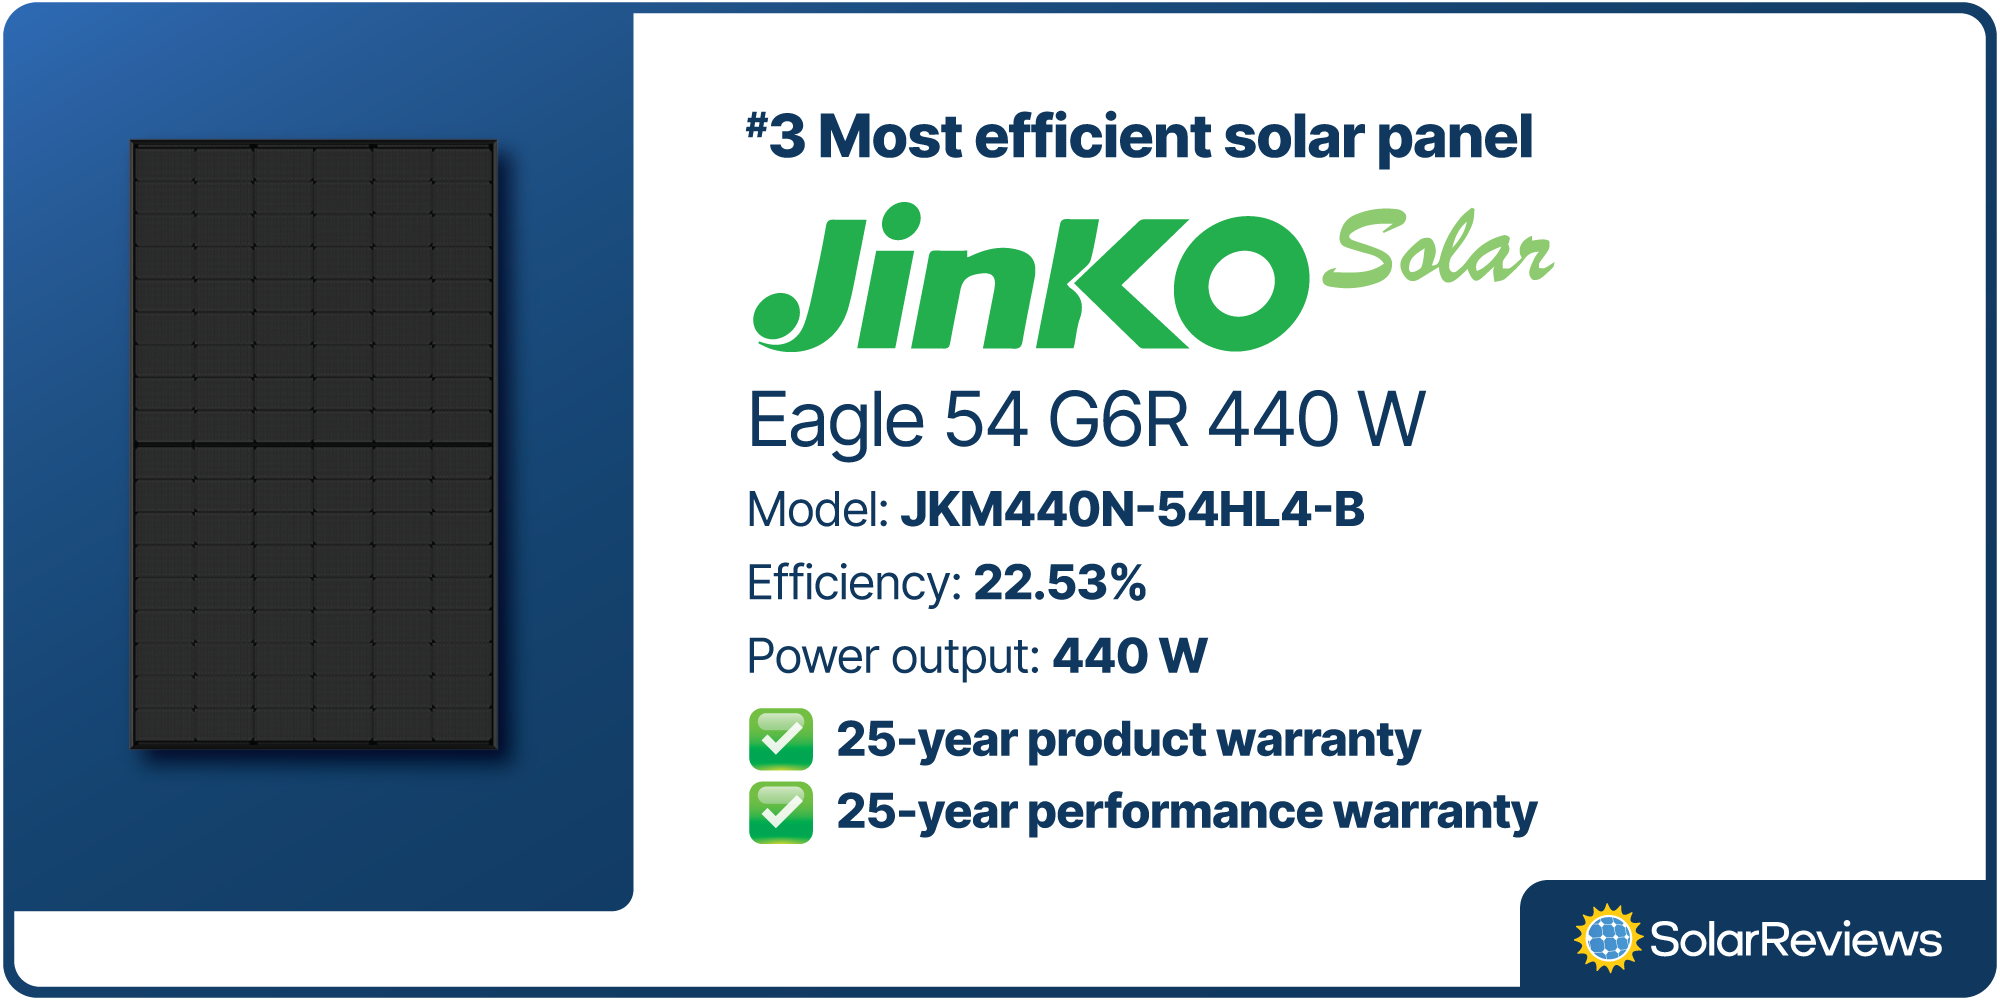 Jinko Solar's Eagle 54 G6R 440 Watt panel is the third most efficient home solar panel at 22.53% efficient and comes with 25-year product and performance warranties.